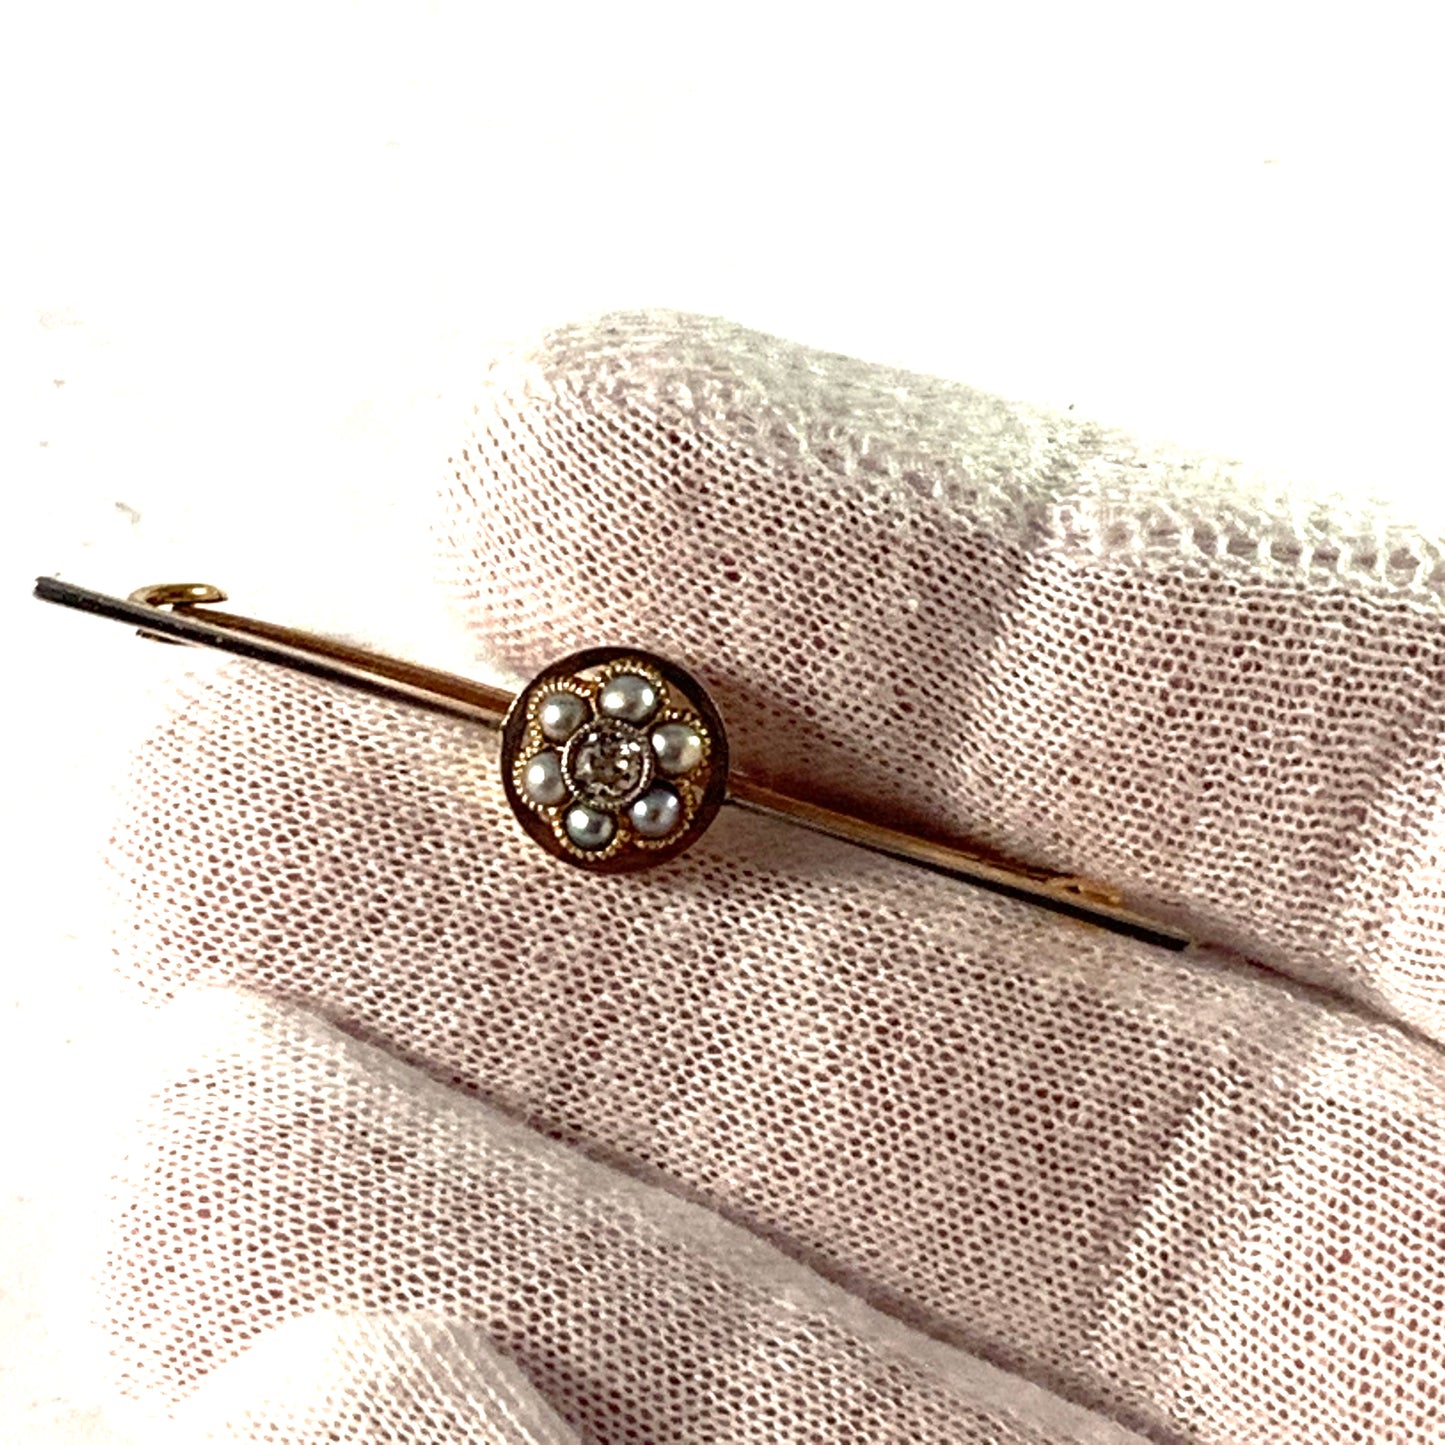 Antique 15k Gold Old Cut Diamond Seed Pearl Brooch Pin.